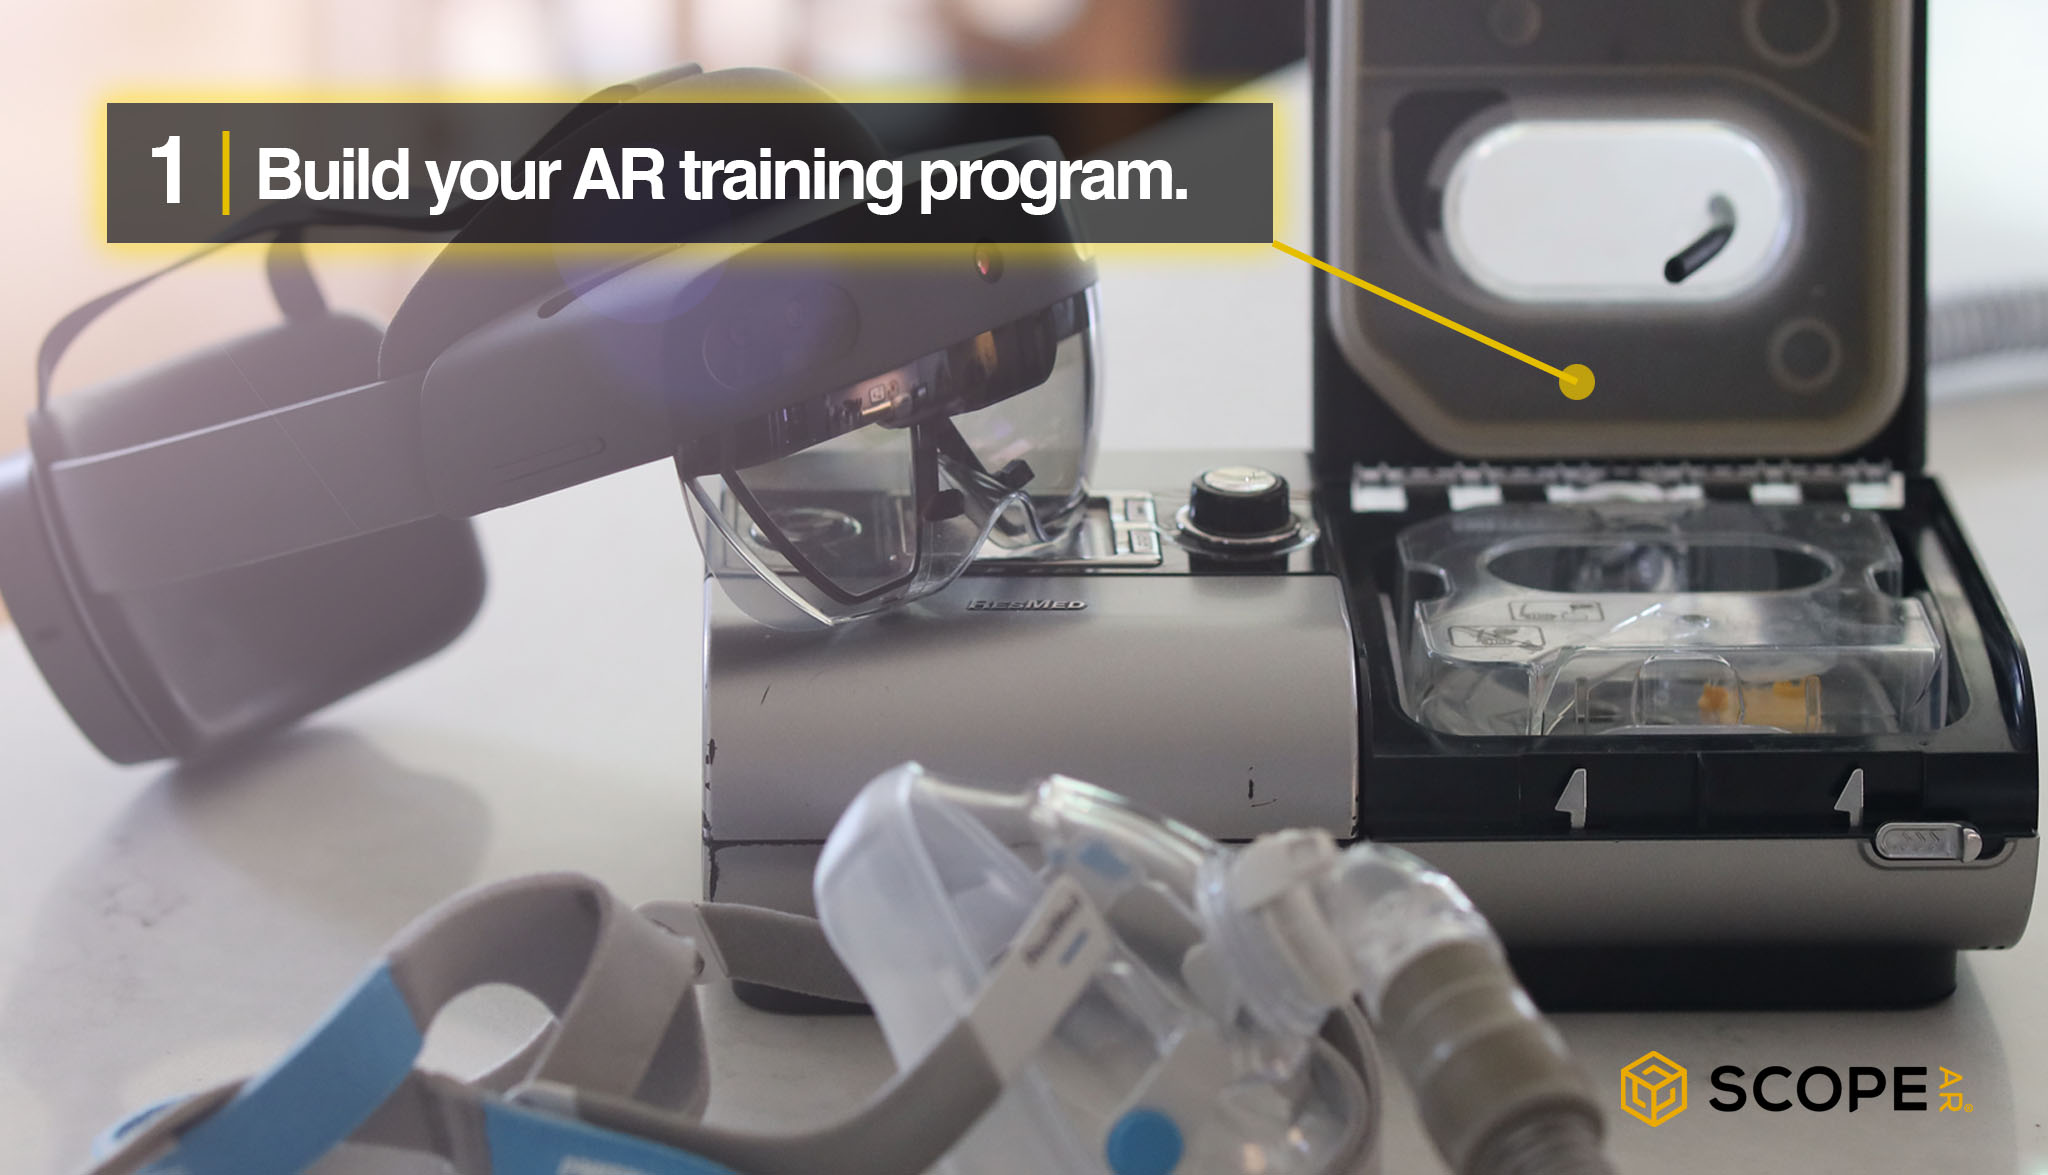 Medical Devices: 4 things you didn’t know about building an AR training program